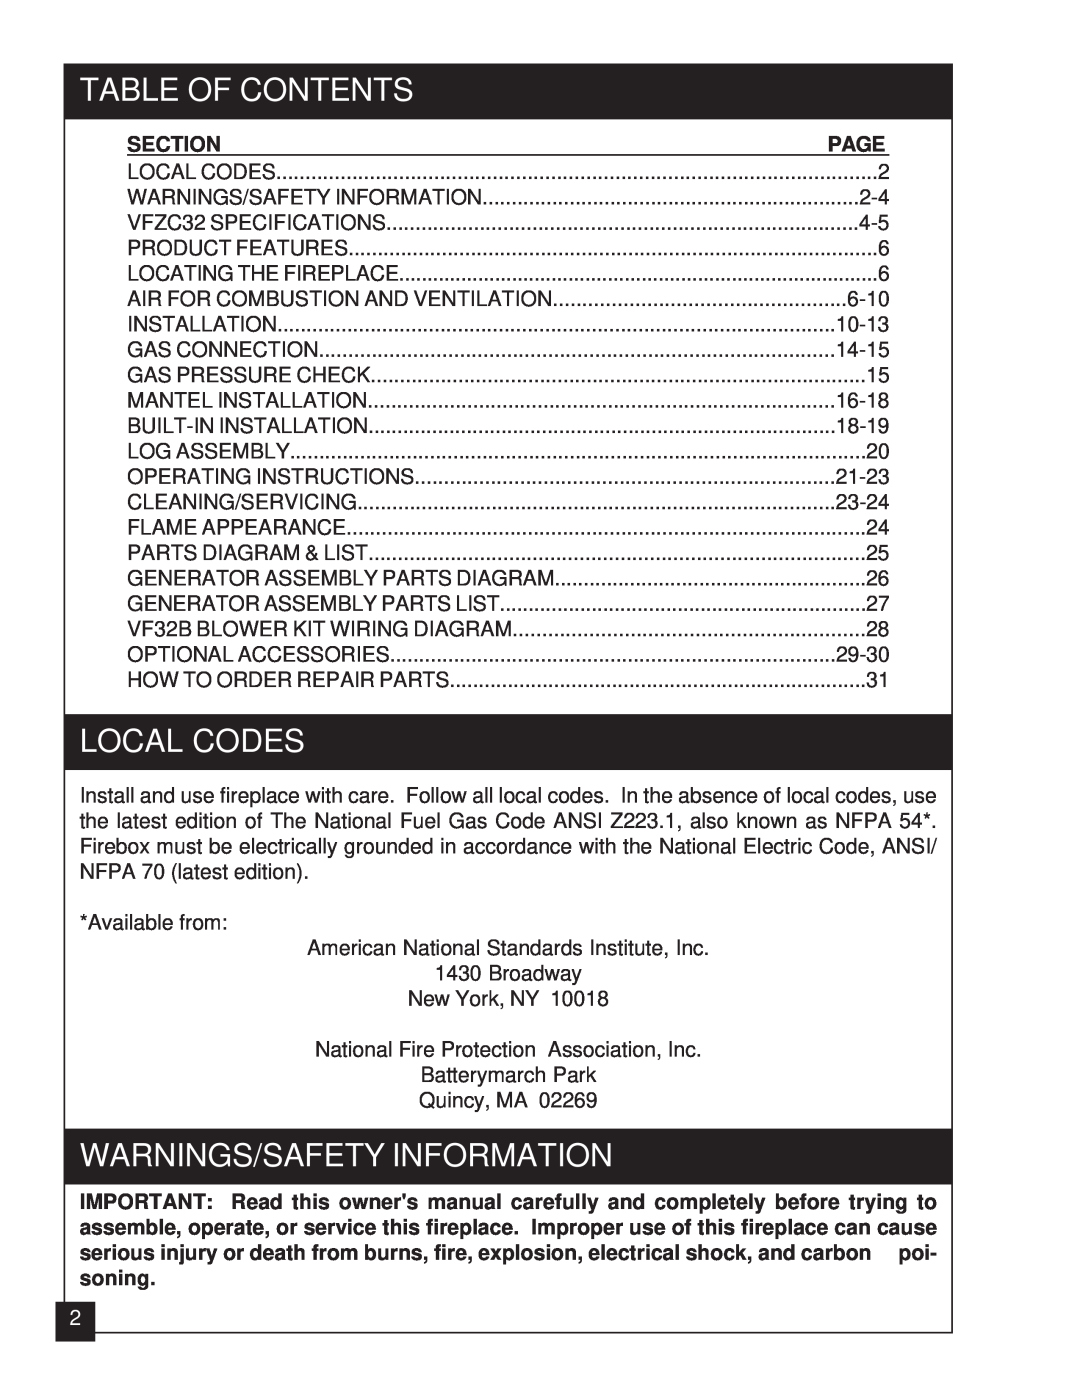 United States Stove VFZC32N, VFZC32L Table Of Contents, Local Codes, Warnings/Safety Information, Section 